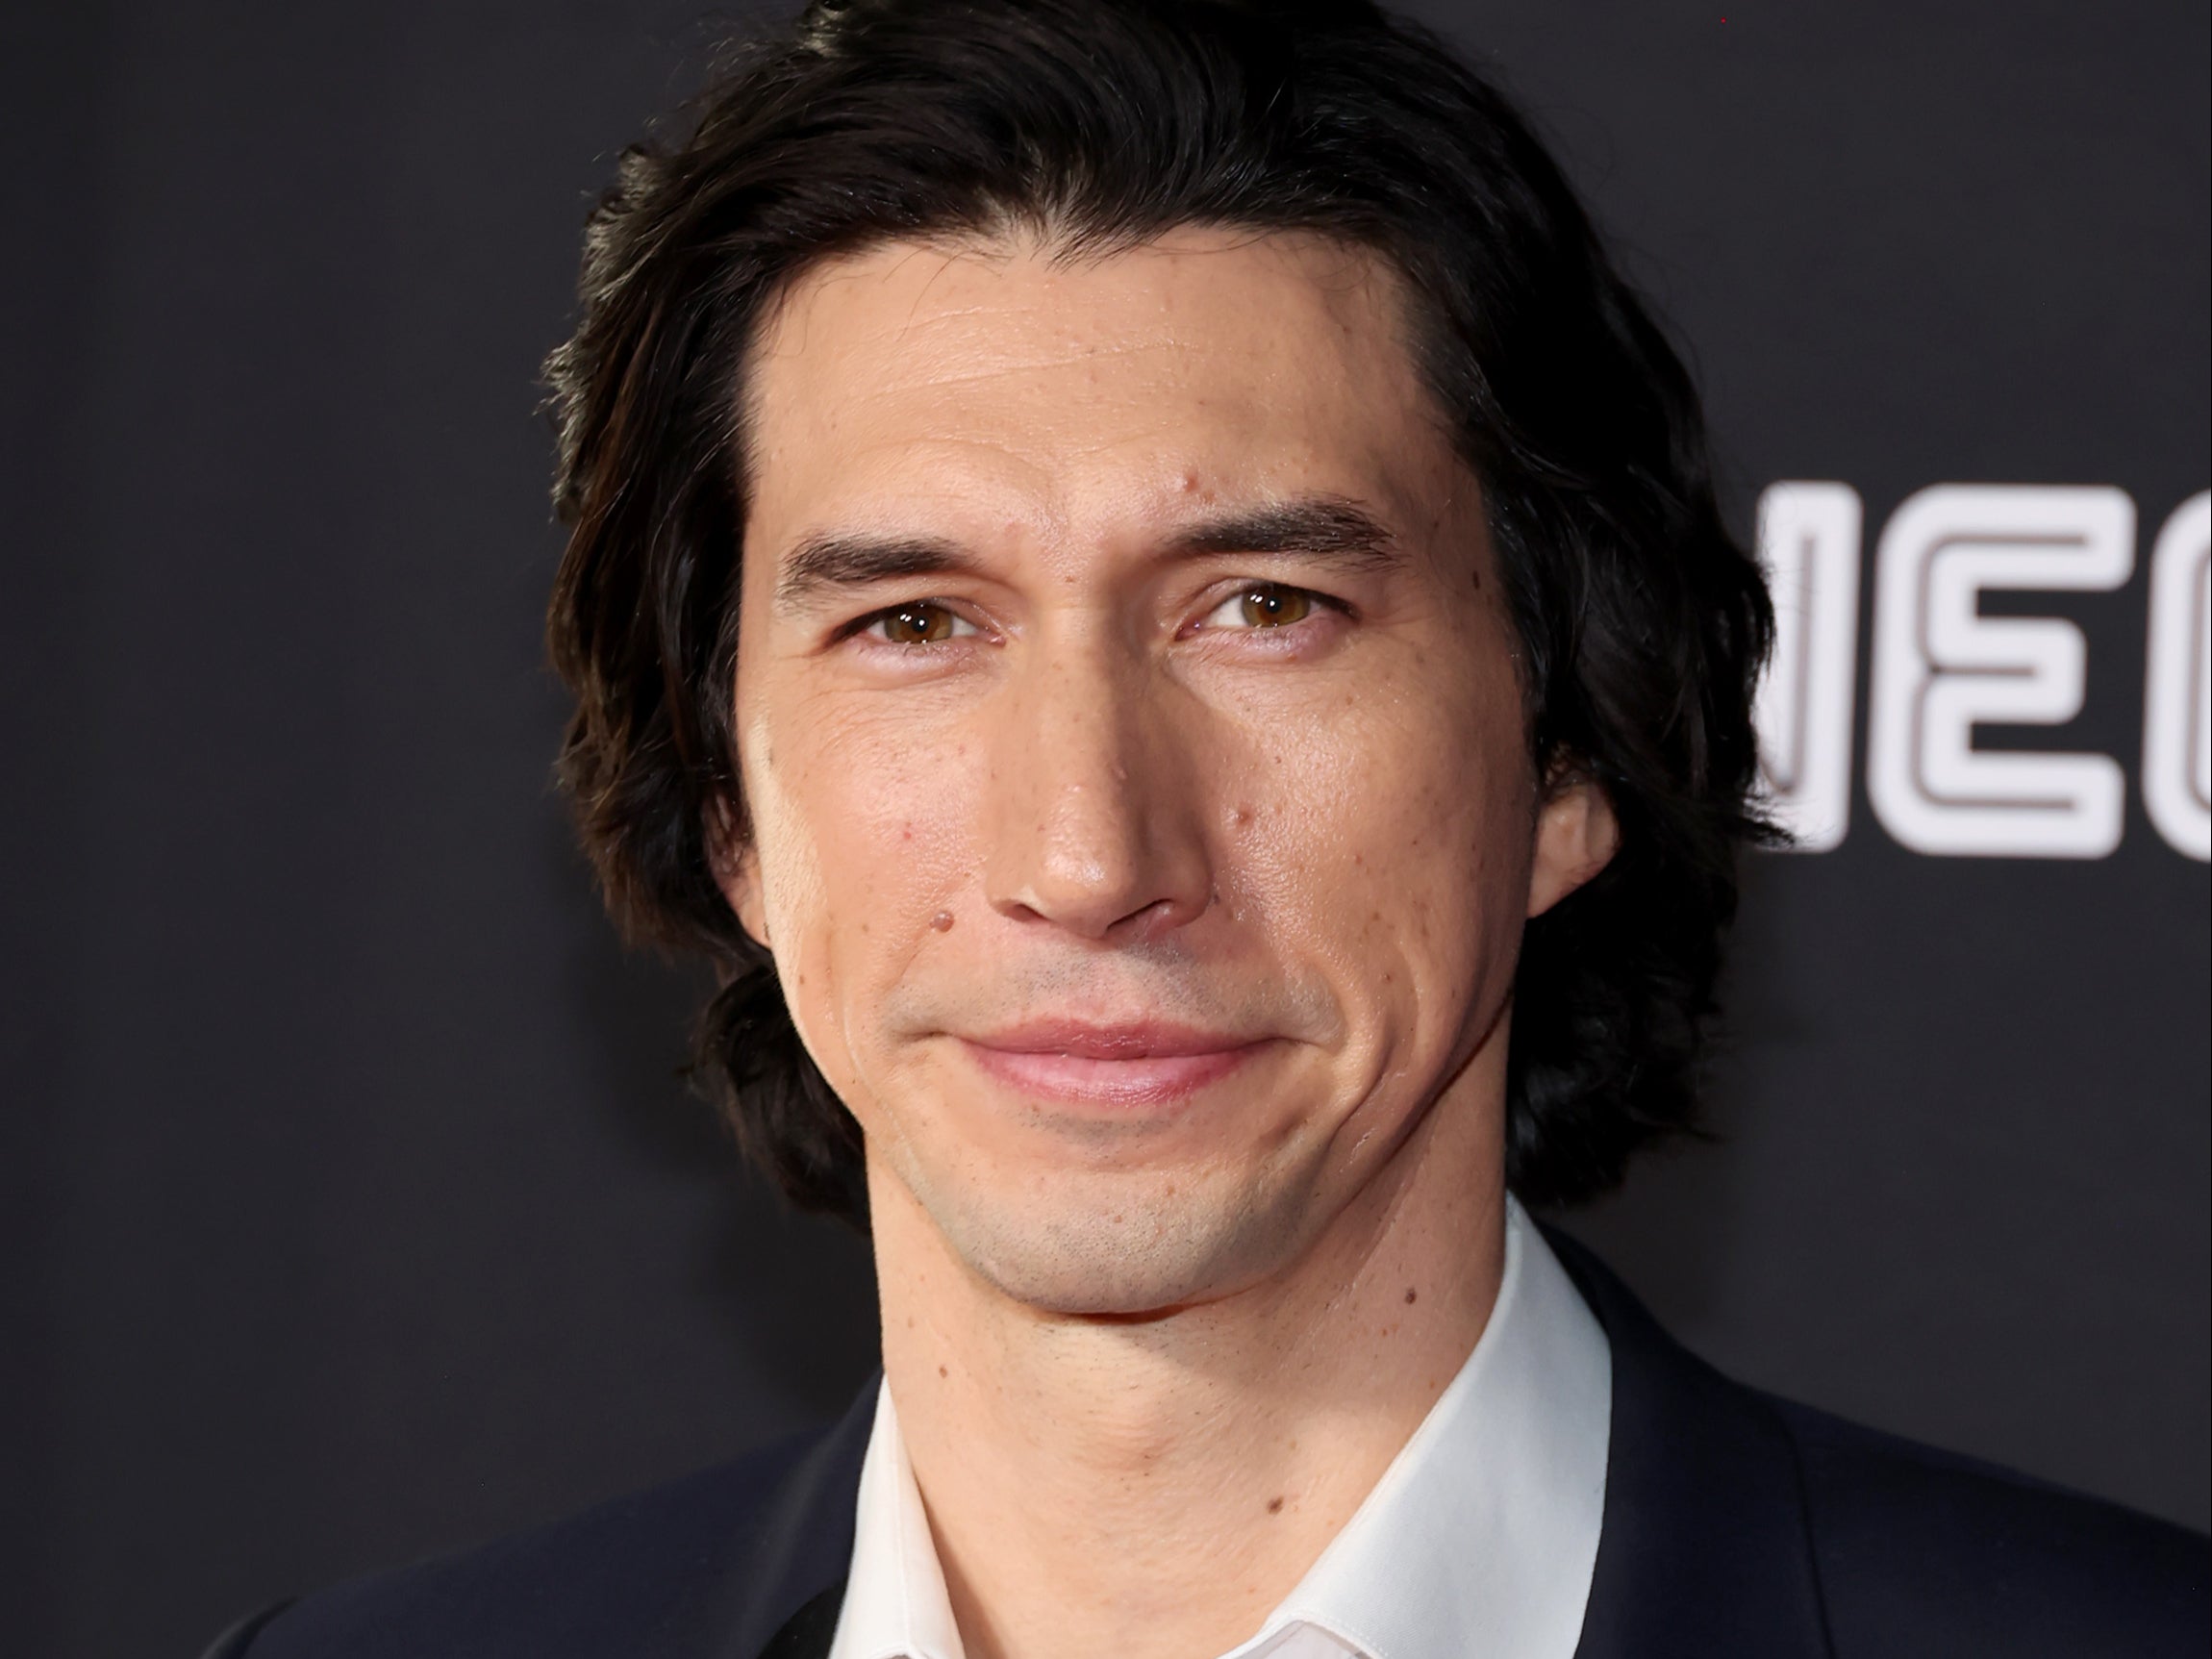 Driver says Kylo Ren’s arc drastically changed over course of ‘Star Wars’ trilogy